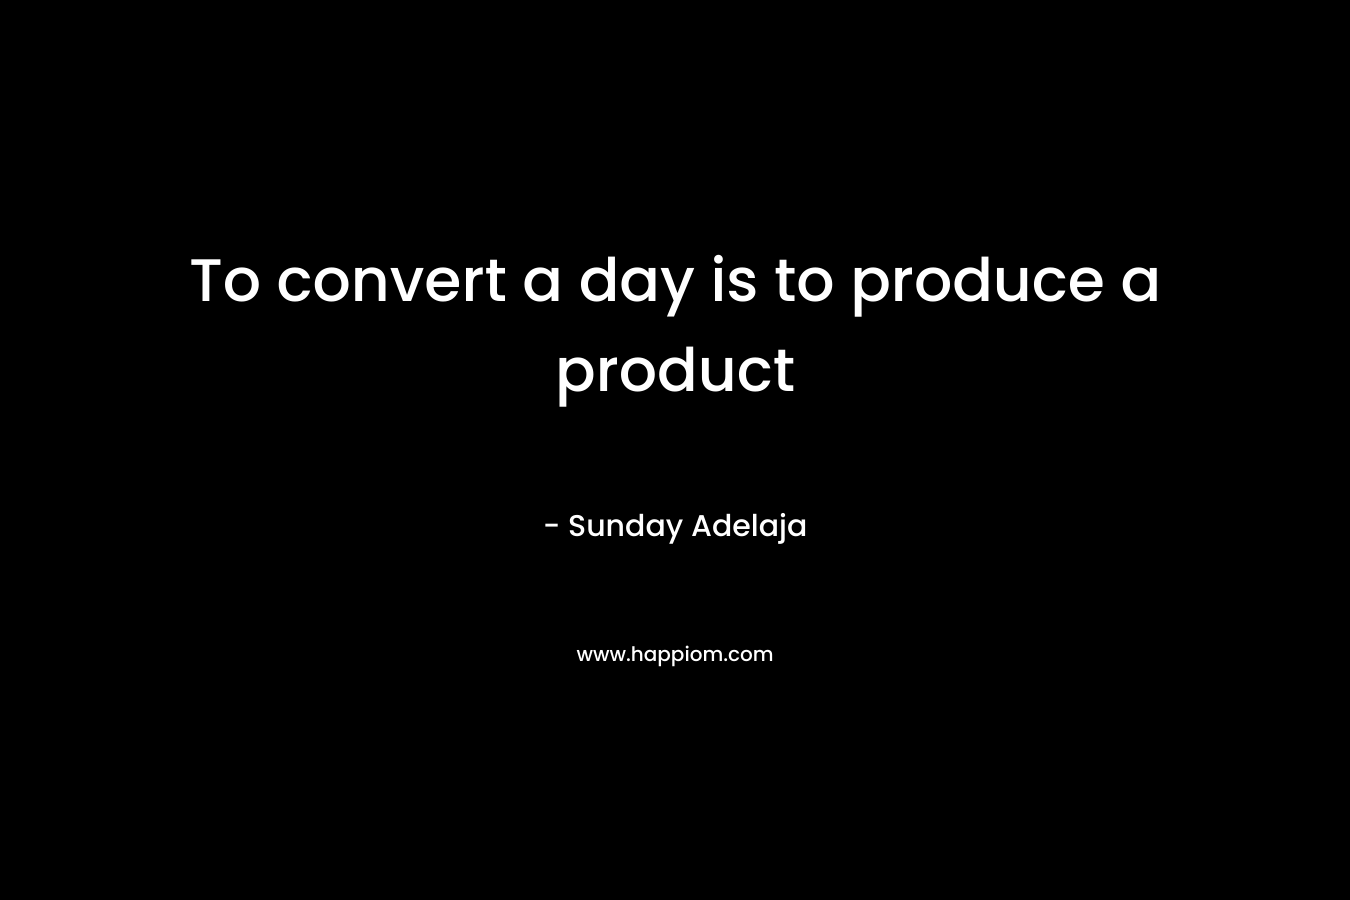 To convert a day is to produce a product